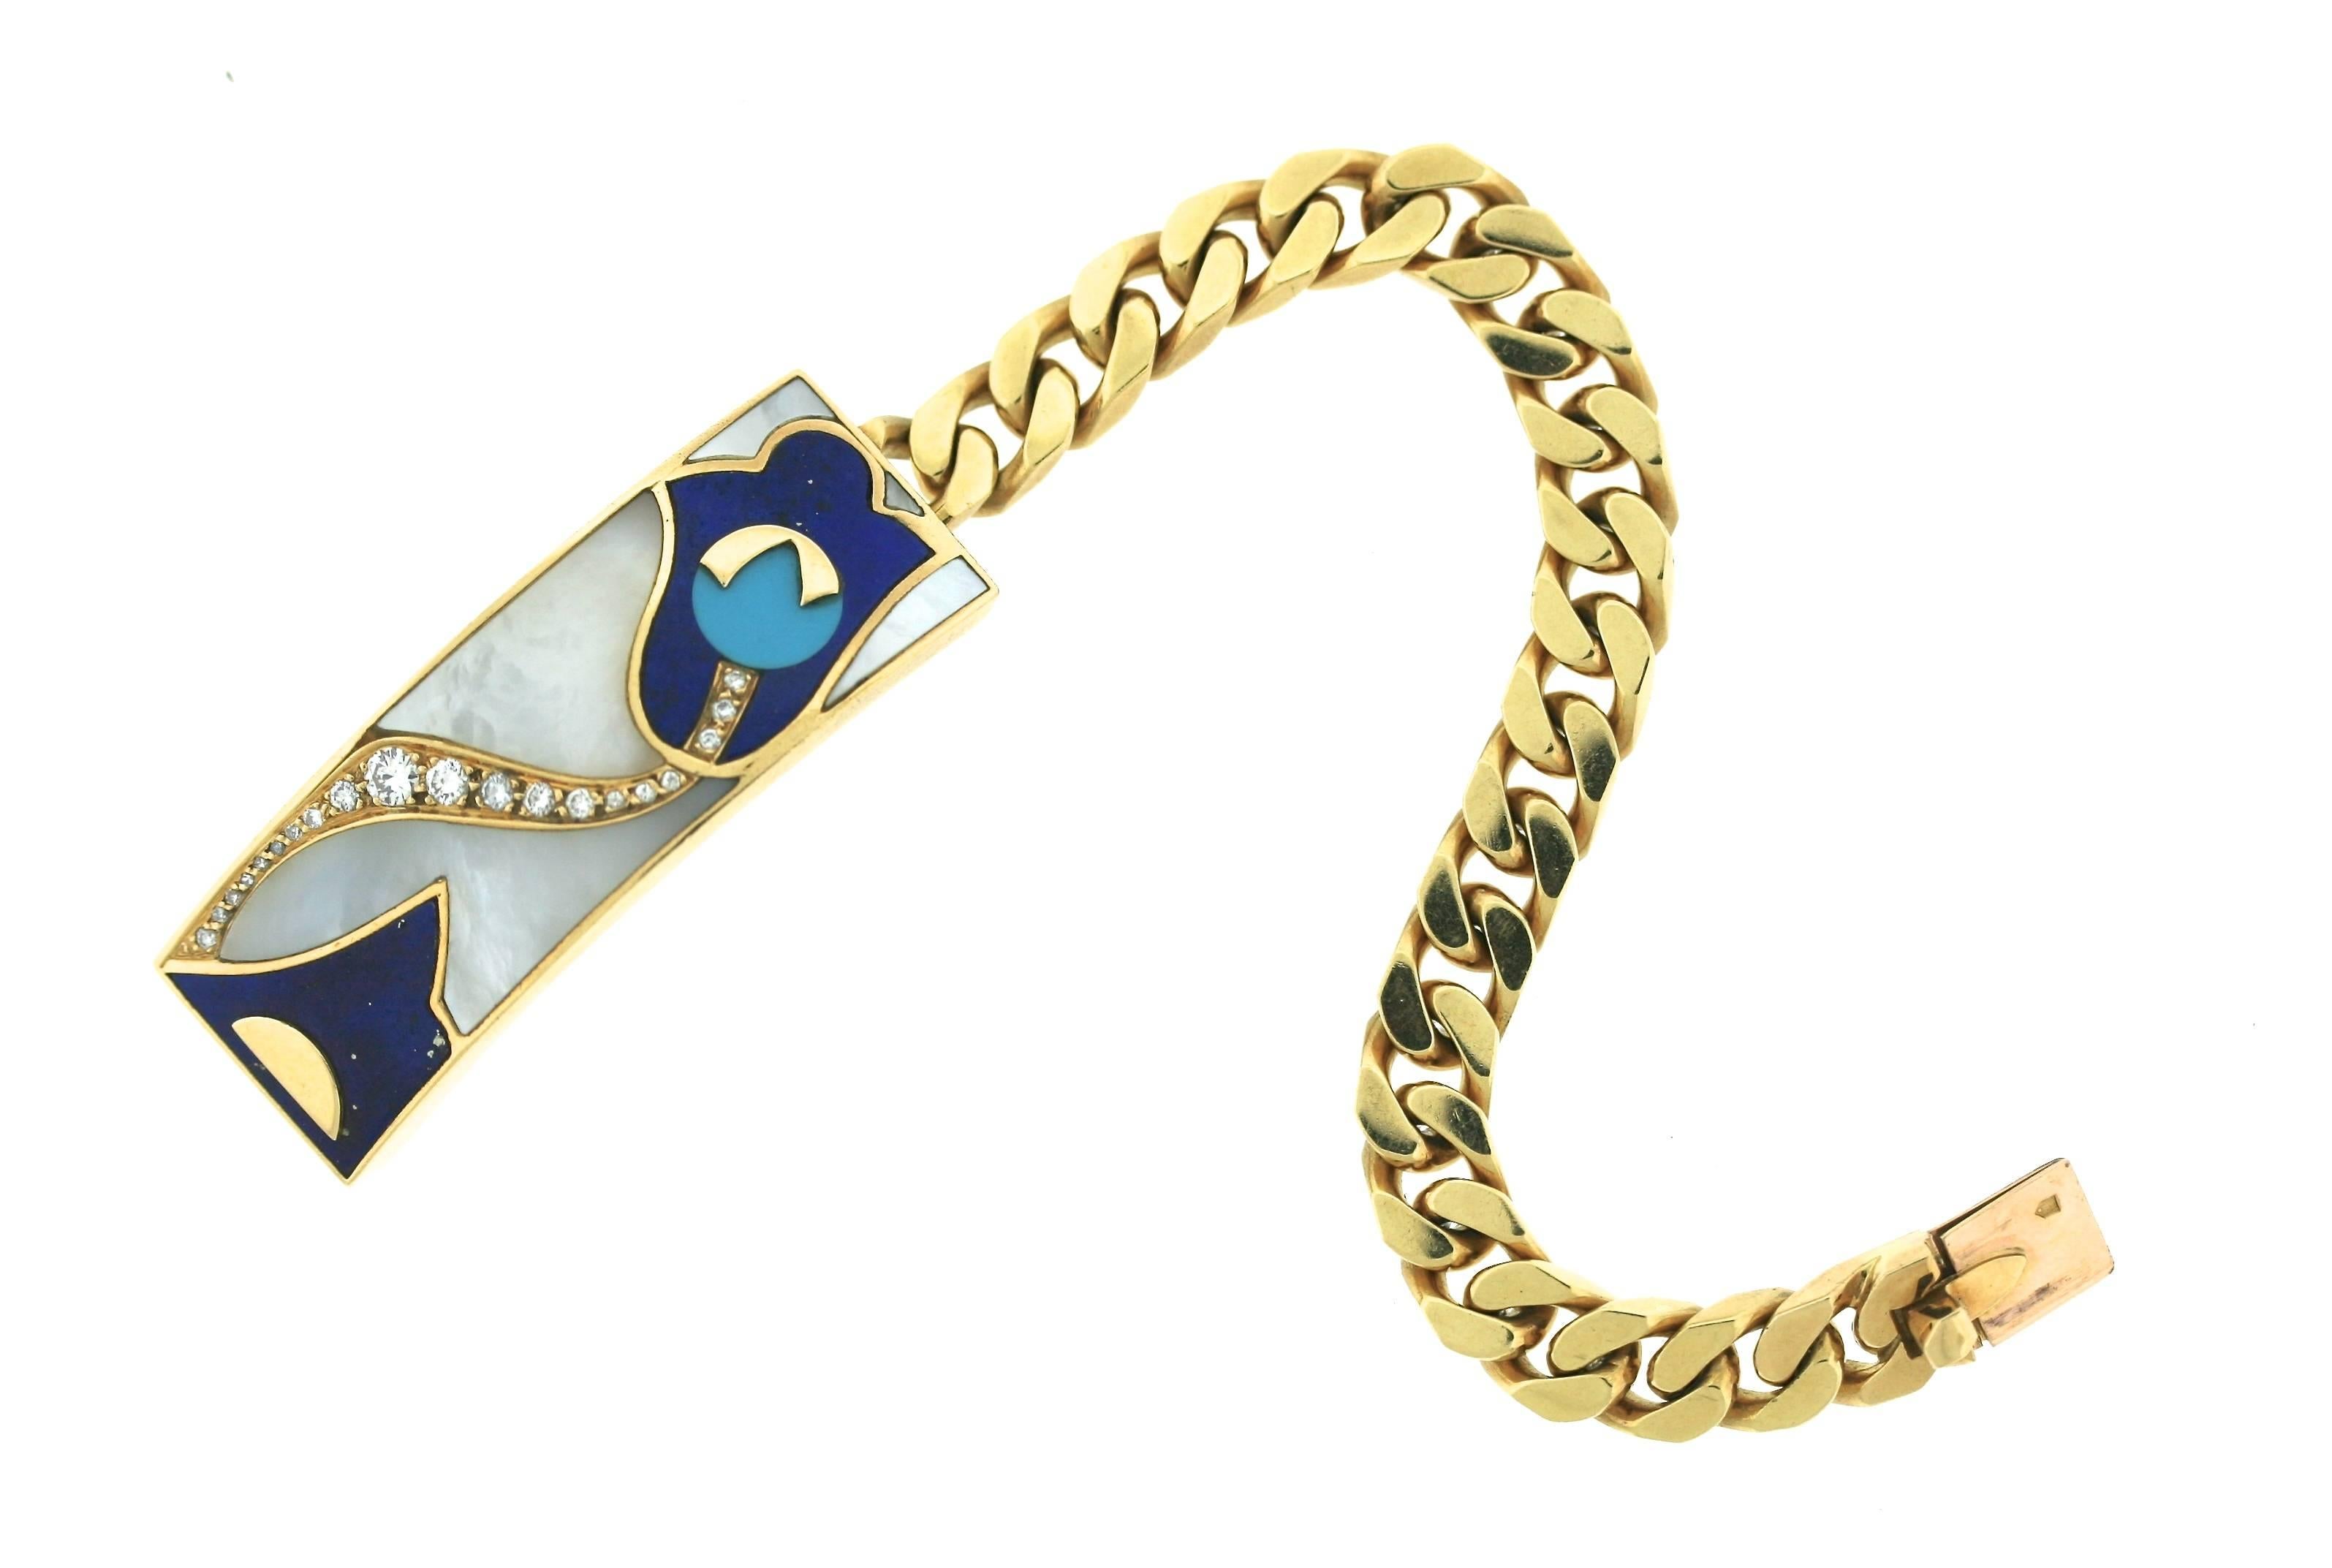 Bulgari 18k gold ID bracelet with heavy curb link chain centering a rectangular plaque of a stylized tulip design with inlaid mother-of-pearl, lapis and turquoise enamel with inset diamonds. The vibrant colors and whimsical style of this